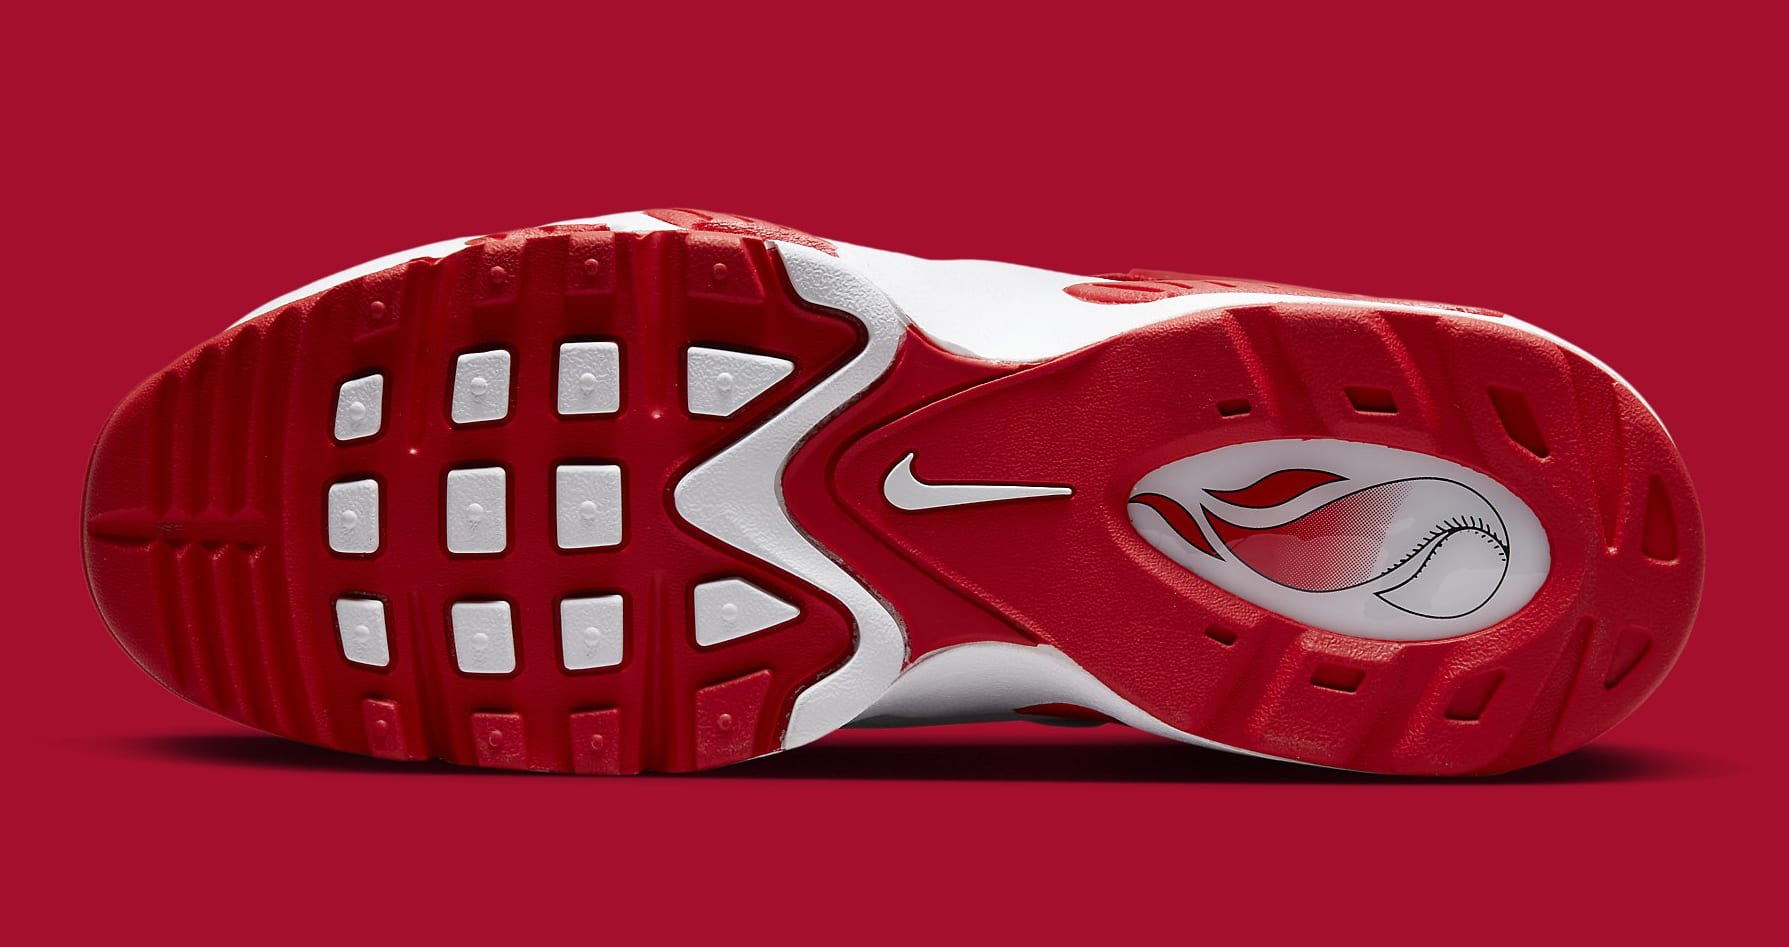 The Cincinnati Reds Take Over This Nike Air Griffey Max 1 - Sneaker News